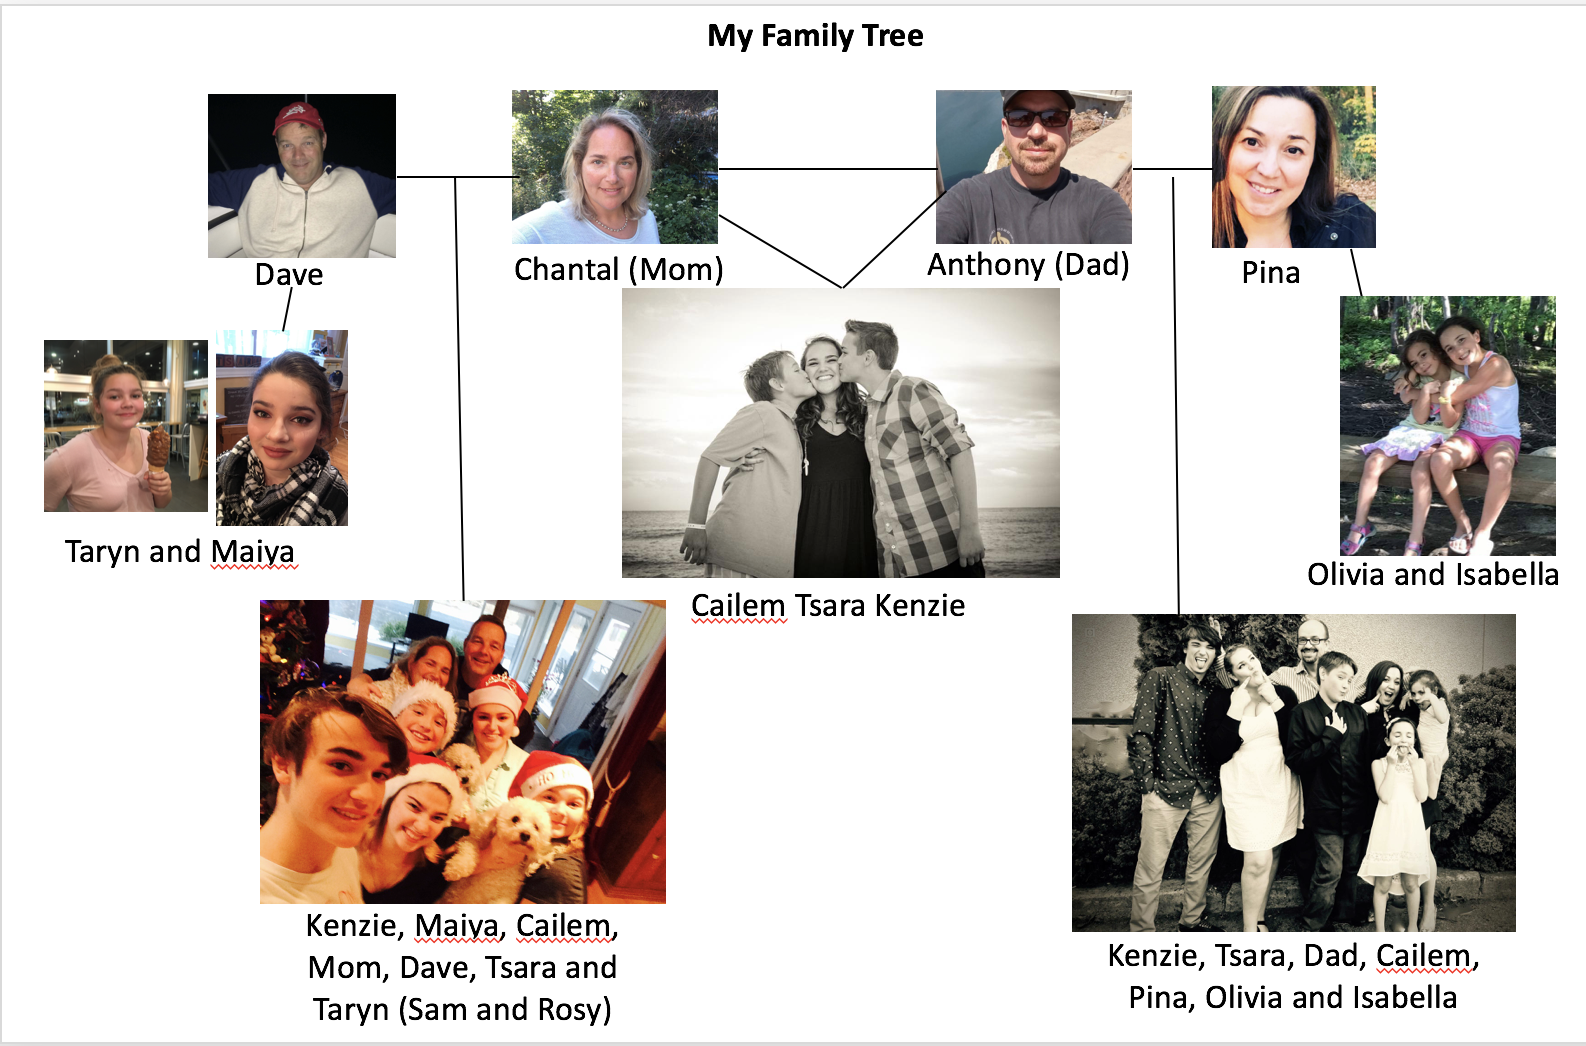 This is an image of my family tree